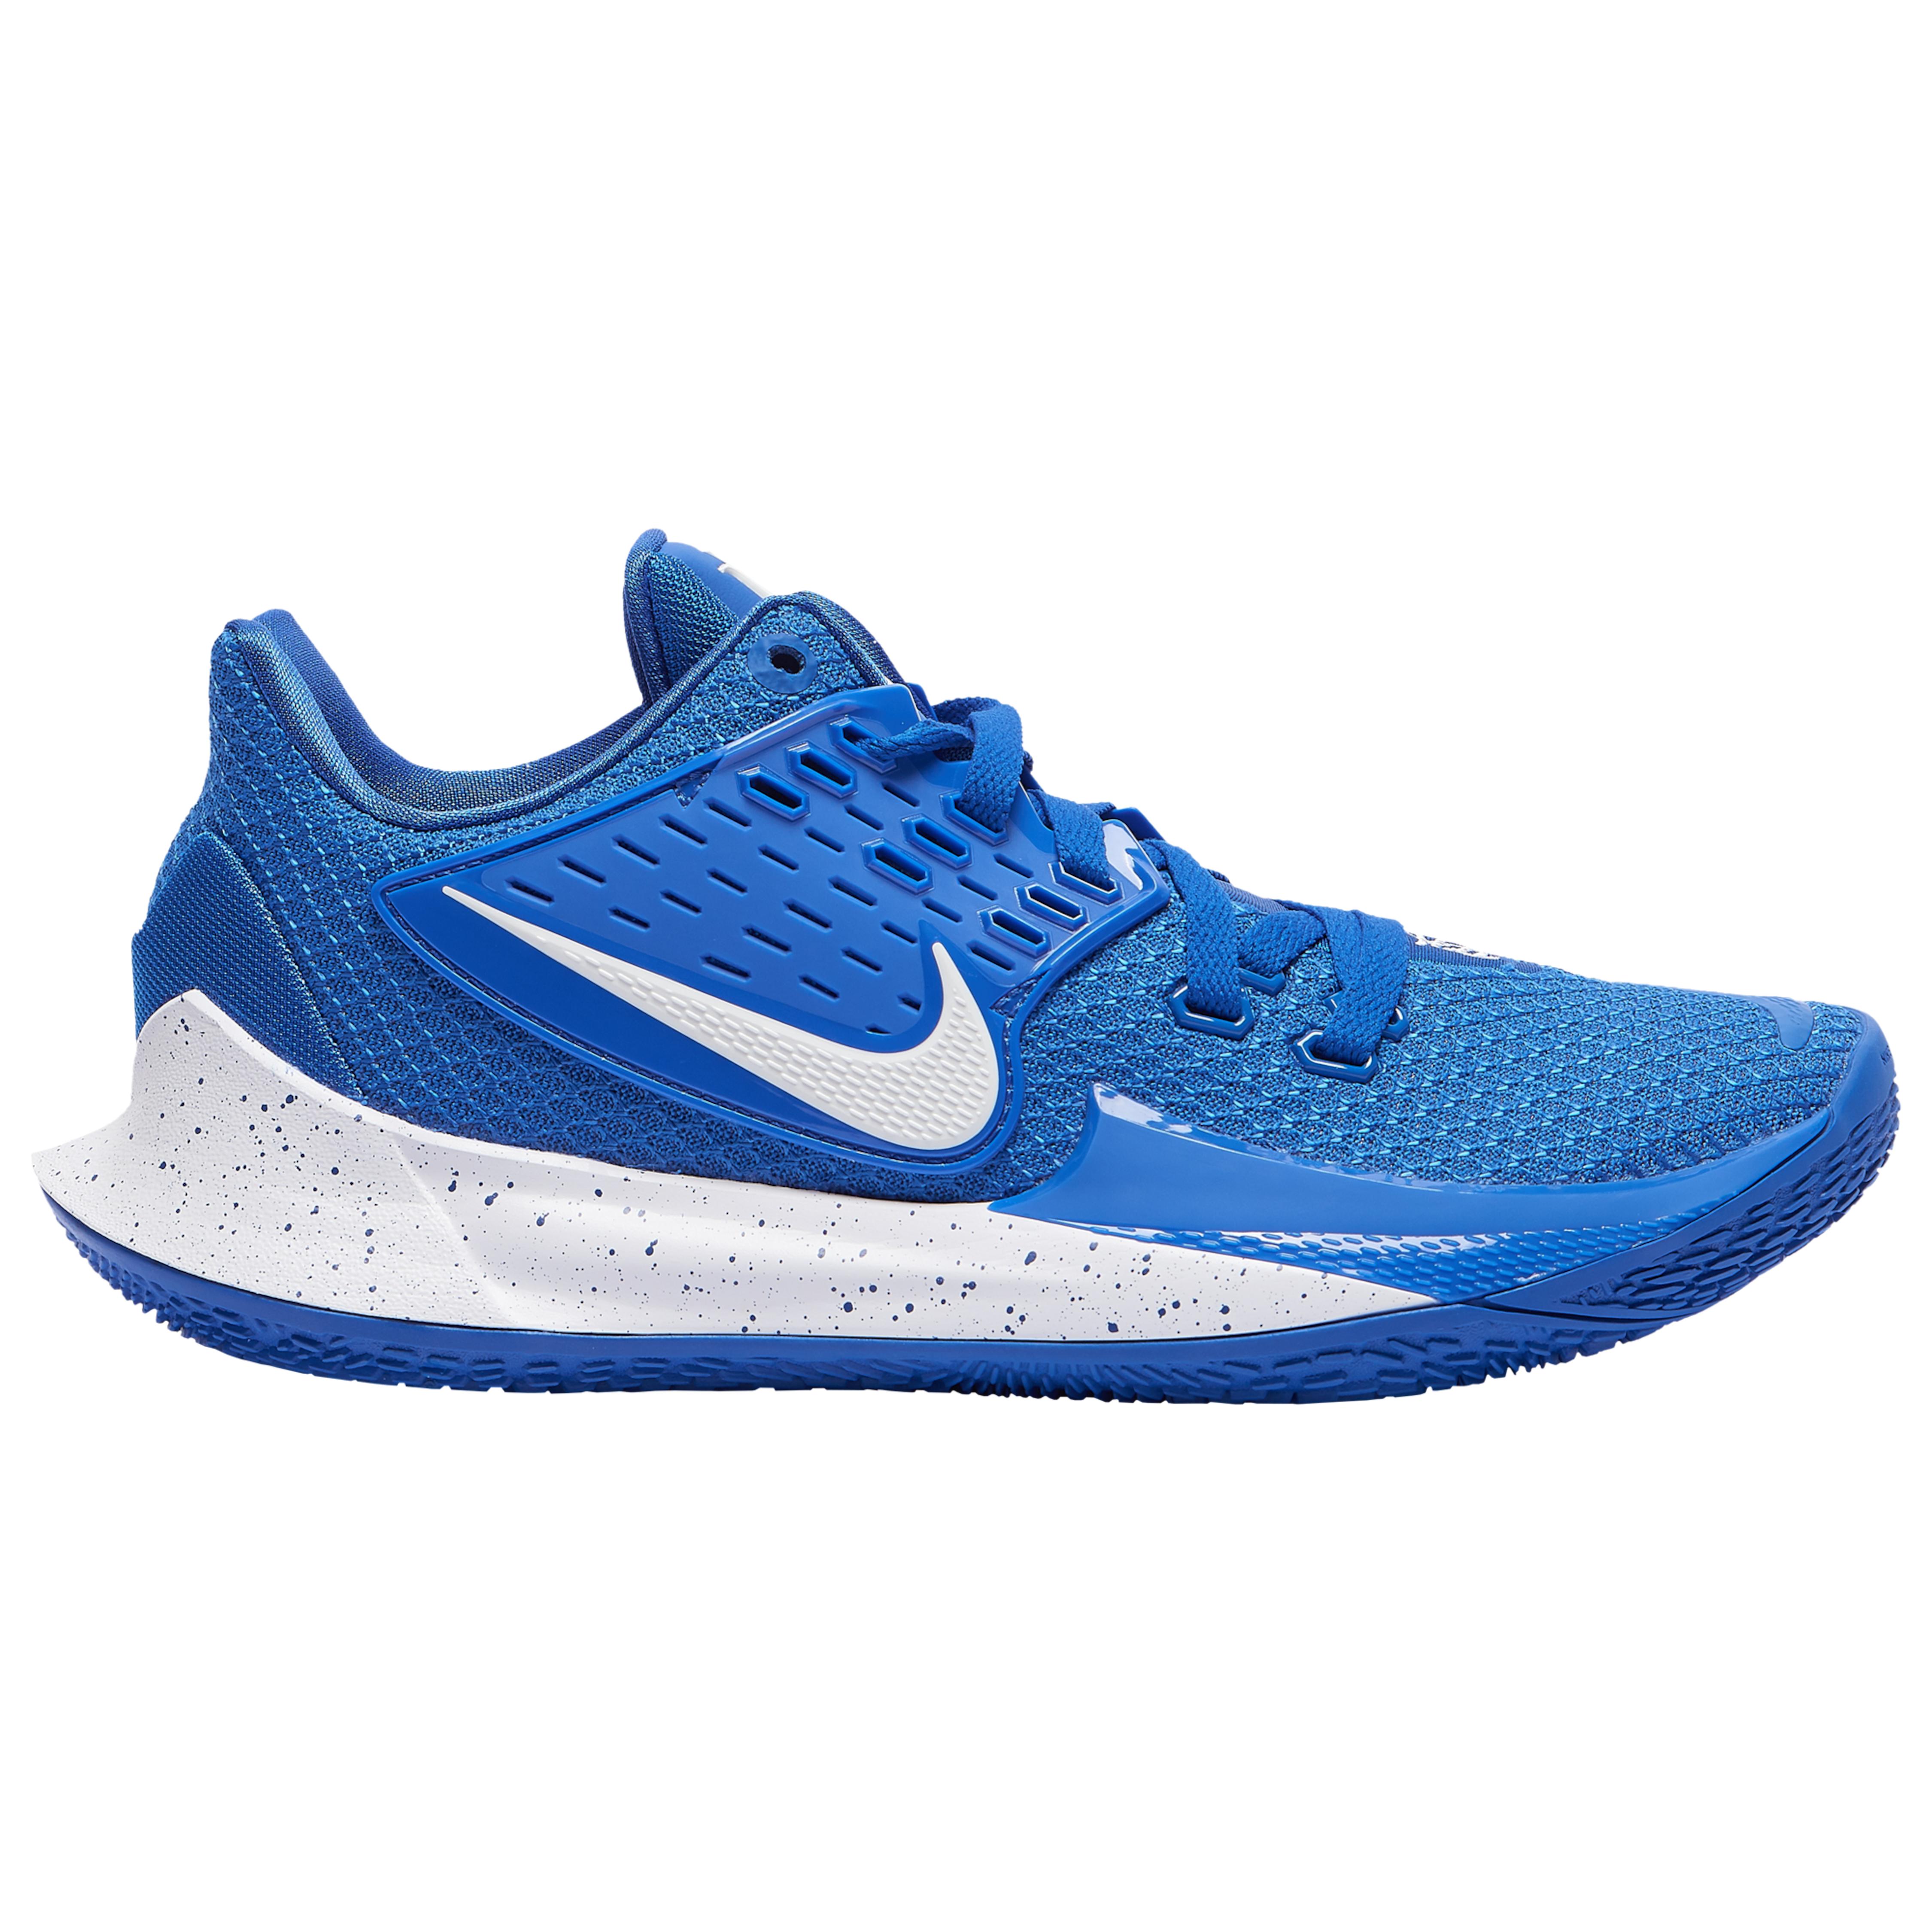 Nike Kyrie Low 2 in Blue for Men - Save 